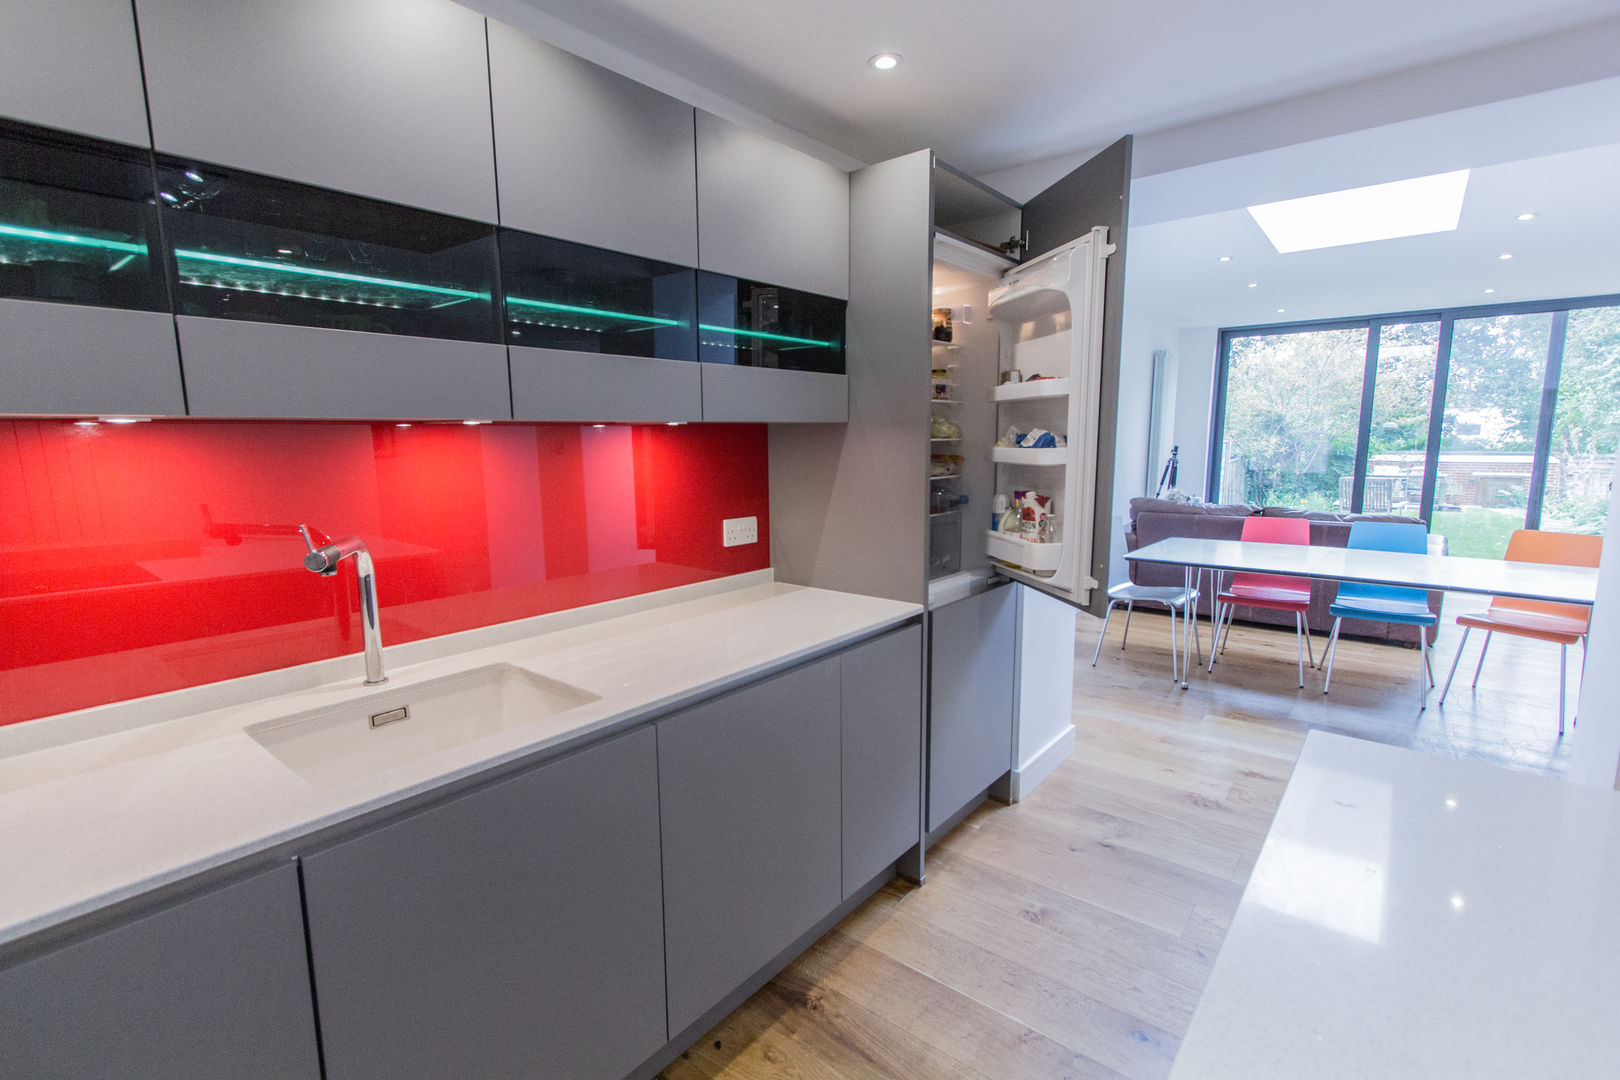 Grey & Red Eco German Kitchens Dapur Modern MDF Nobilia,Twinkle White worktops,Neff oven,Neff combination microwave,Blanco sink and tap,Neff Induction hob,open plan galley style kitchen,glazed wall units